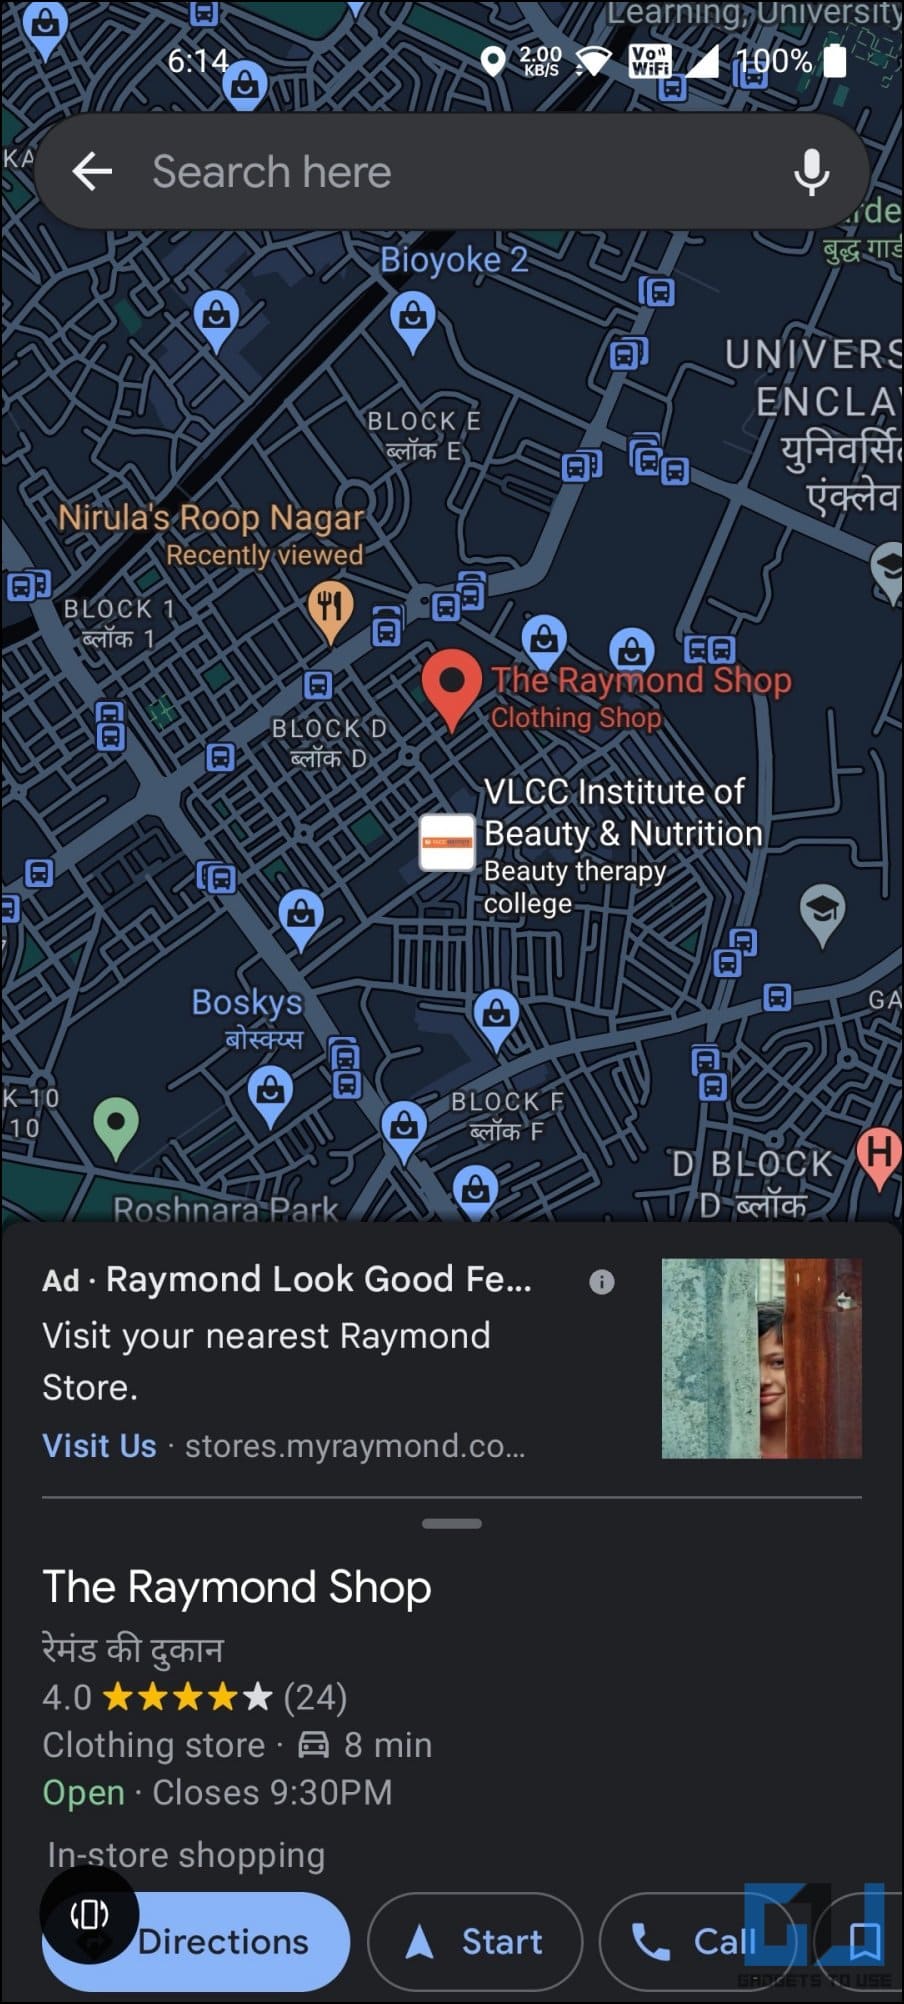 Google Maps Showing Ads